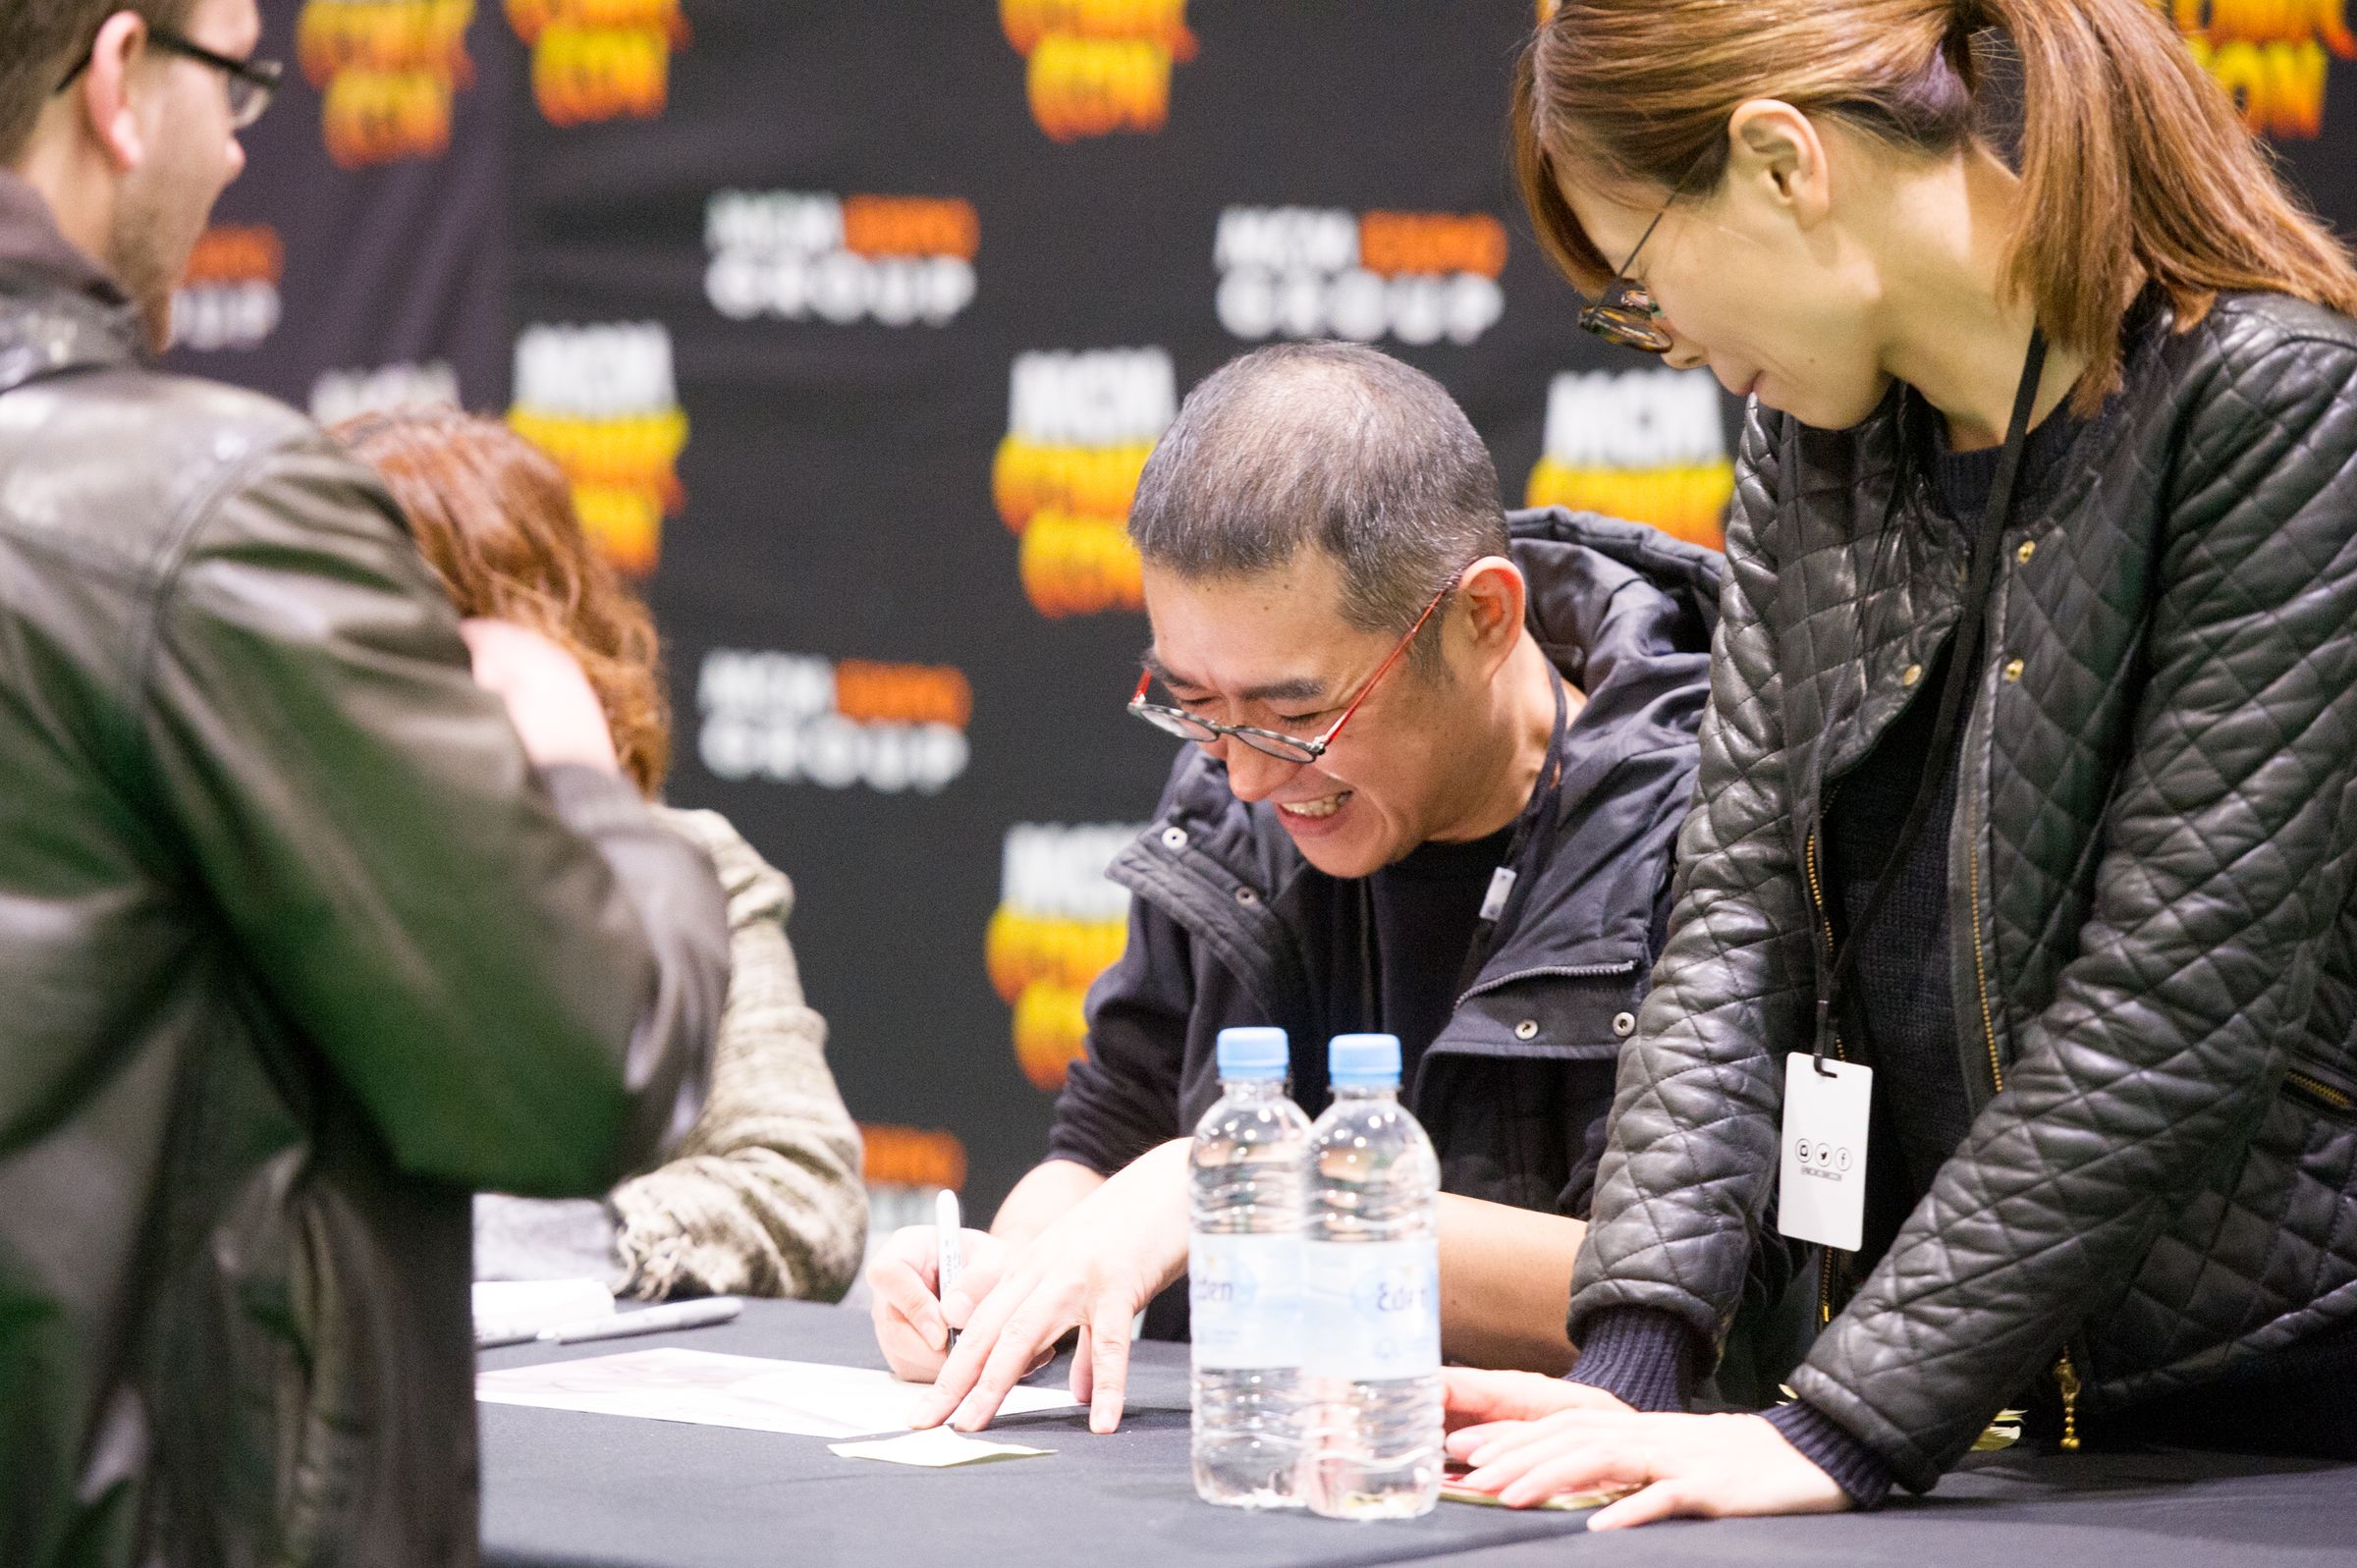 Japanese animator, designer, and animation director Takeshi Honda meeting fans on day 3 of the MCM London Comic Con at ExCel on October 30, 2016 in London, England.